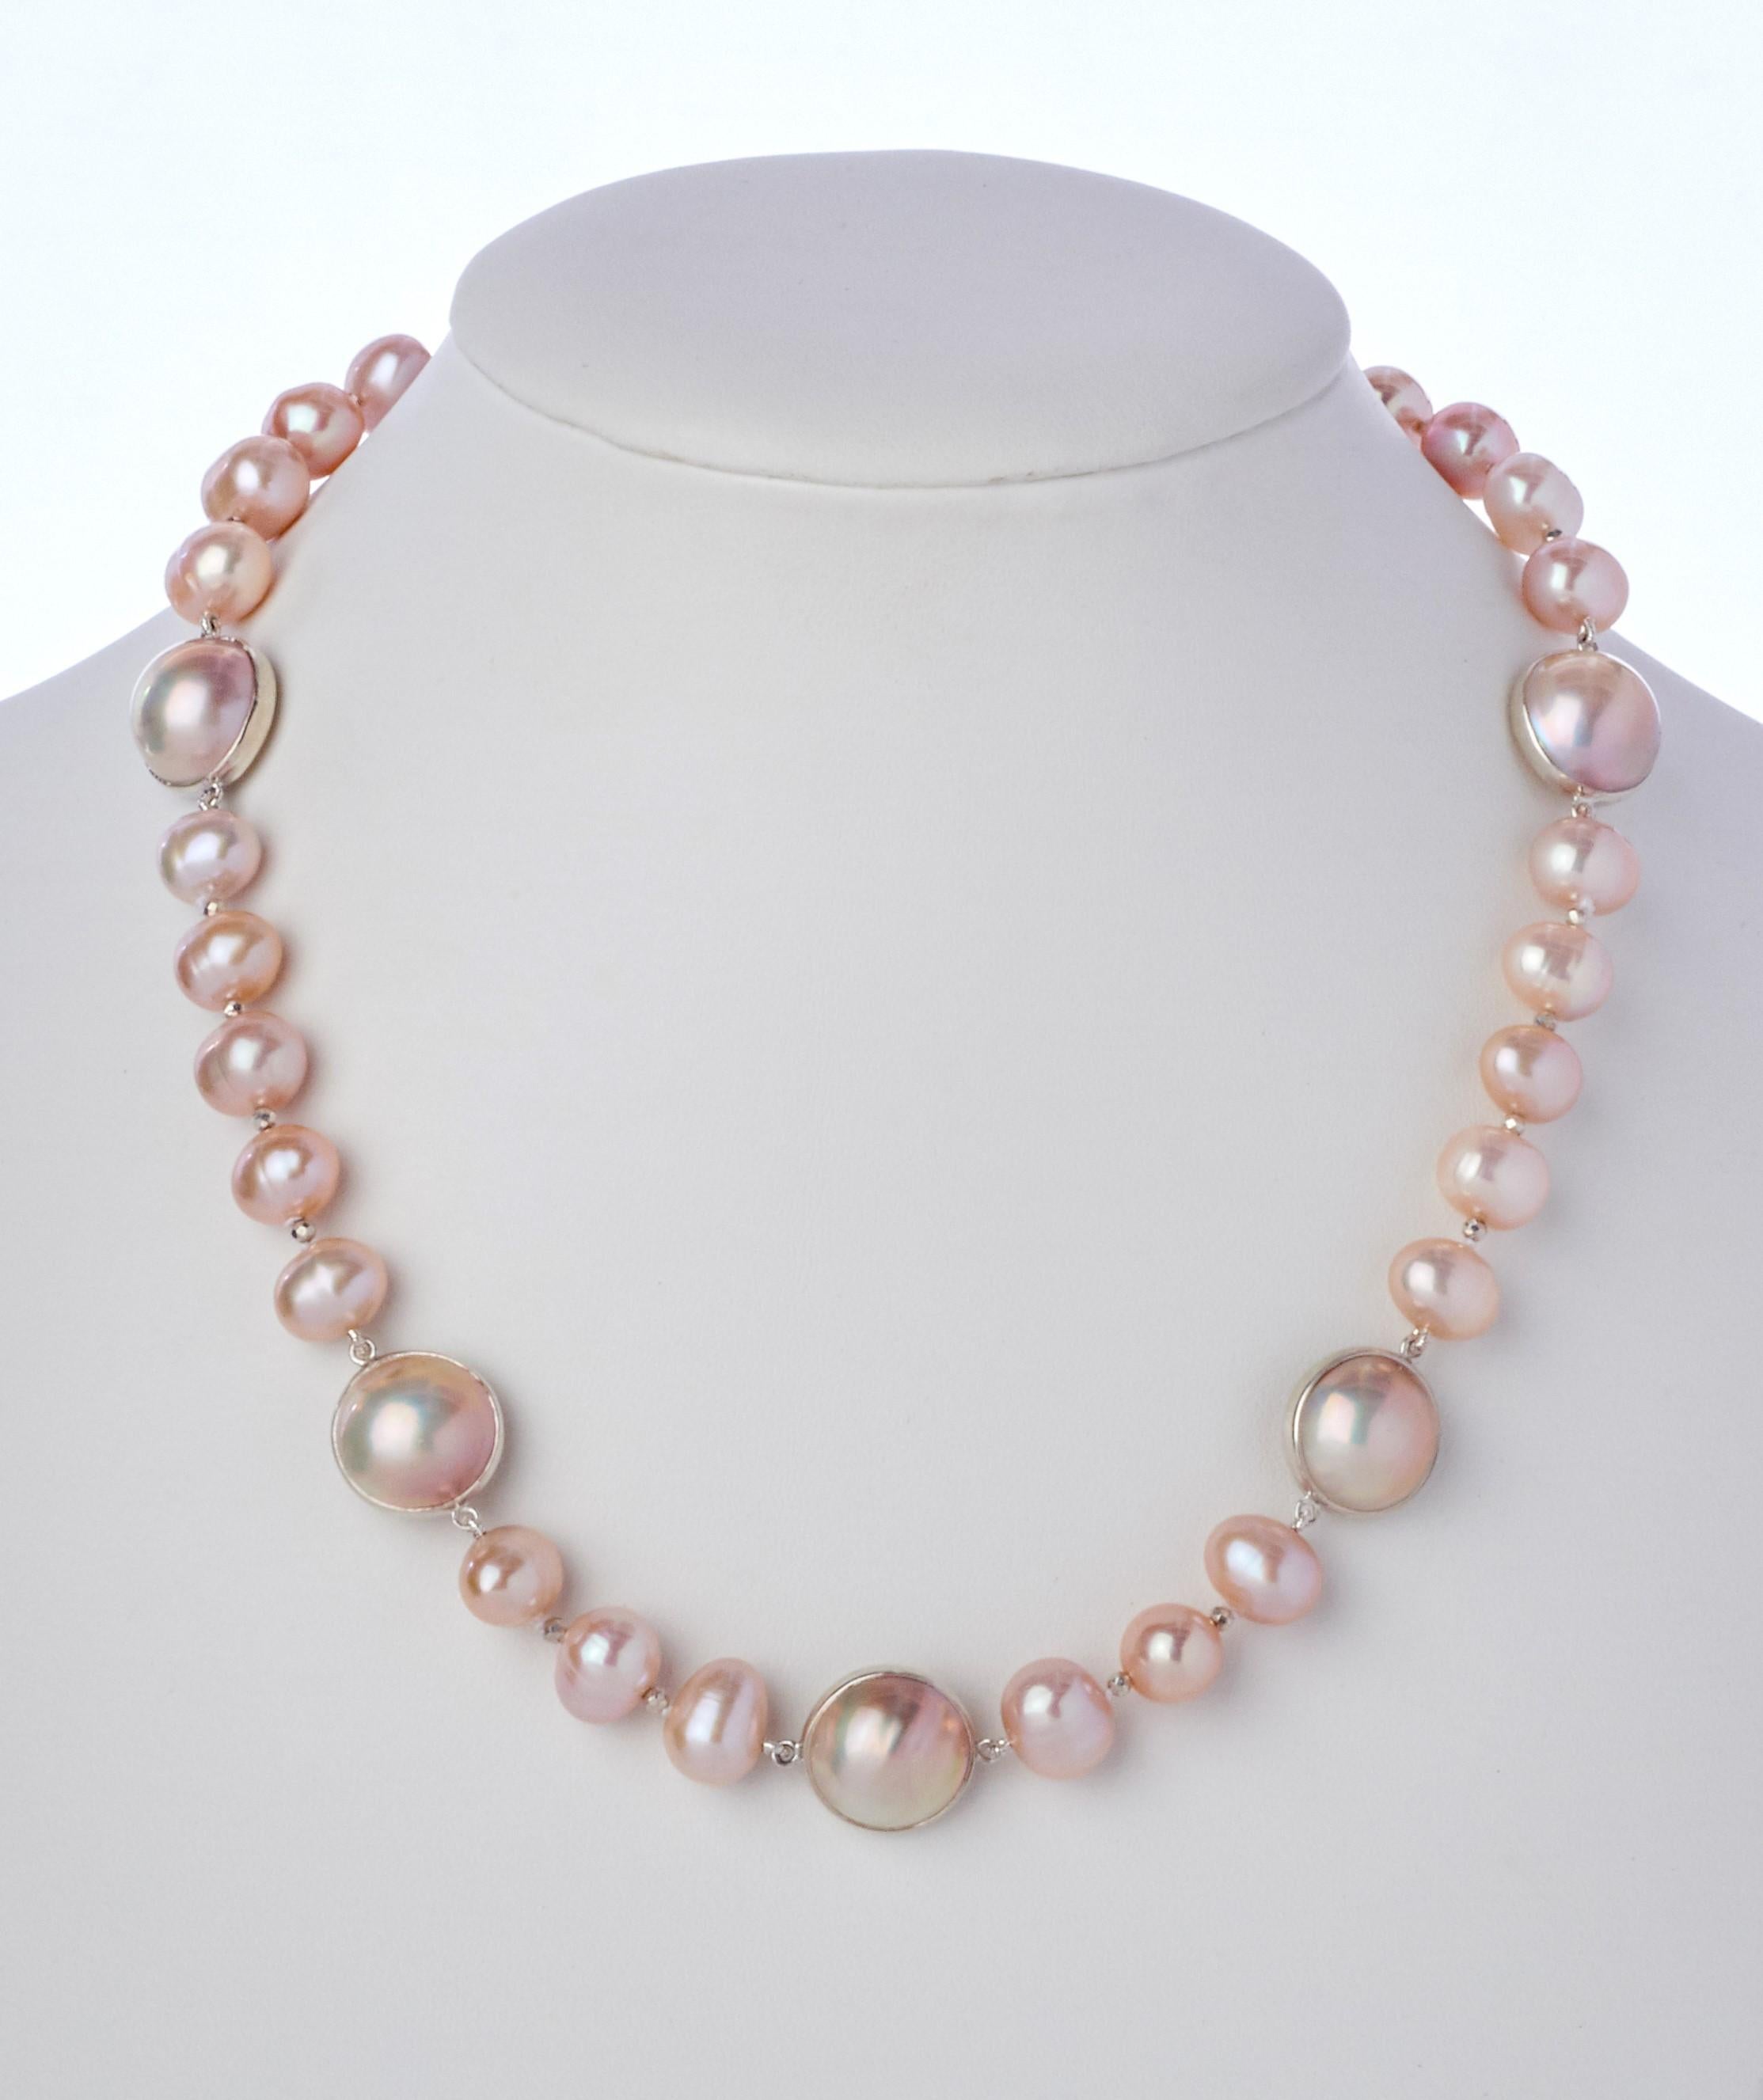 Soft lustrous pink hues with featured white mabe pearl sterling stations create this very pretty 16 inch hand-strung necklace. The strand has thirty 8-1/2 mm blush button pearls which are accented by five 13-1/2 mm white mabe pearls, bezel set in